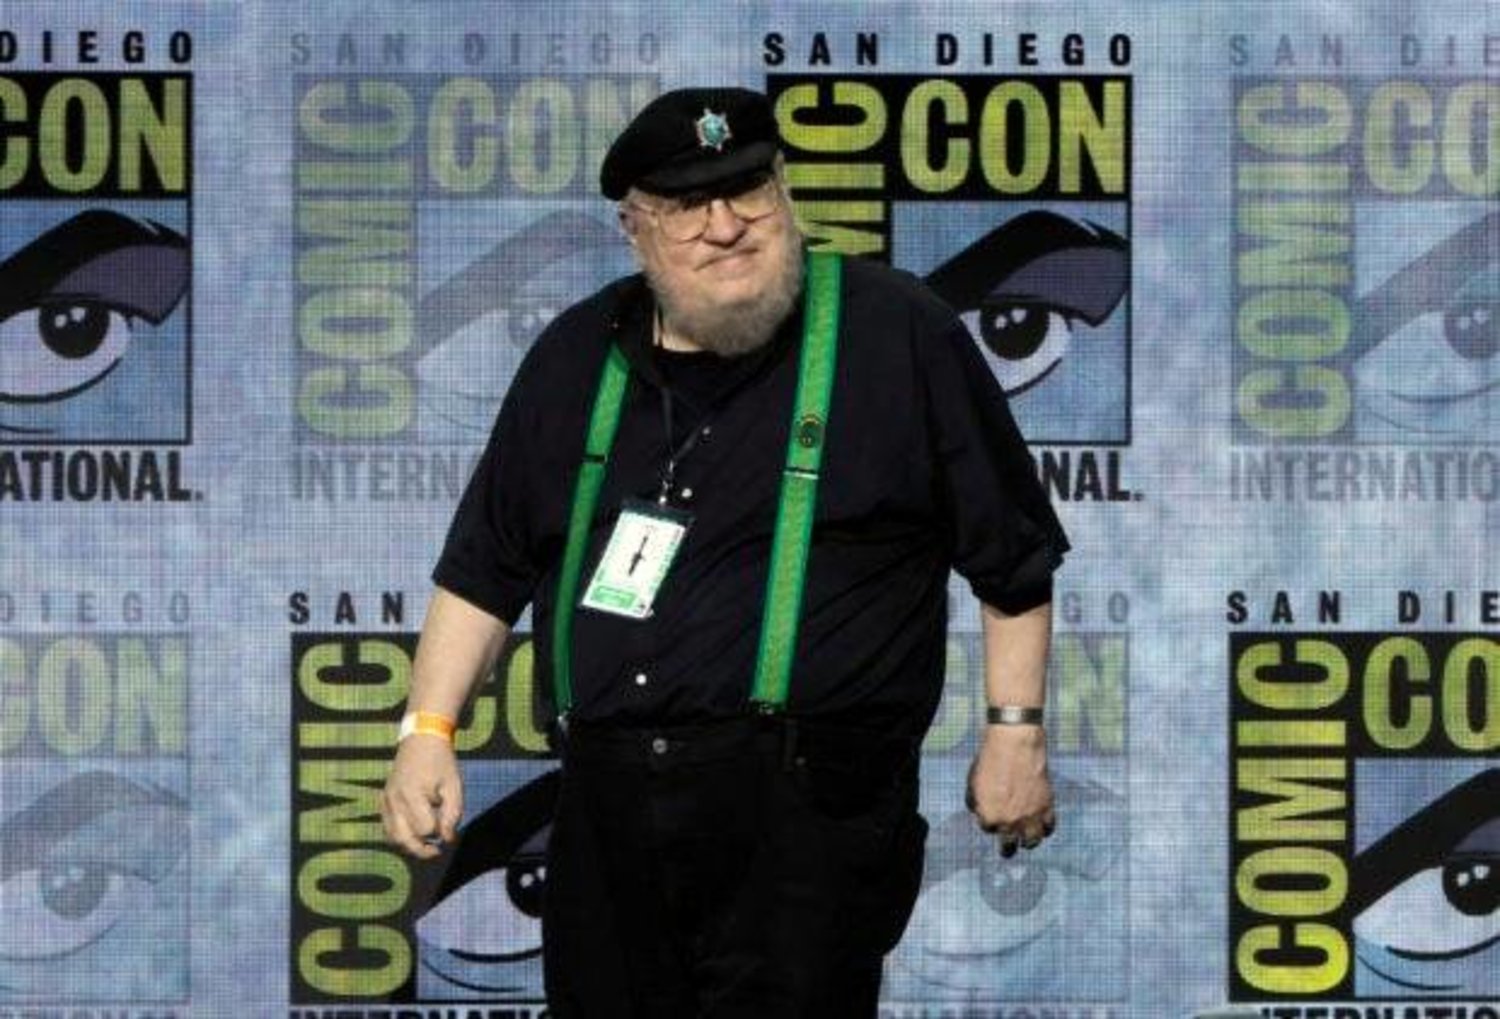 George R.R. Martin speaks onstage at the “House of the Dragon” panel during 2022 Comic Con International: San Diego at San Diego Convention Center on July 23, 2022 in San Diego, California. Image: Getty Images/Kevin Winter via AFP